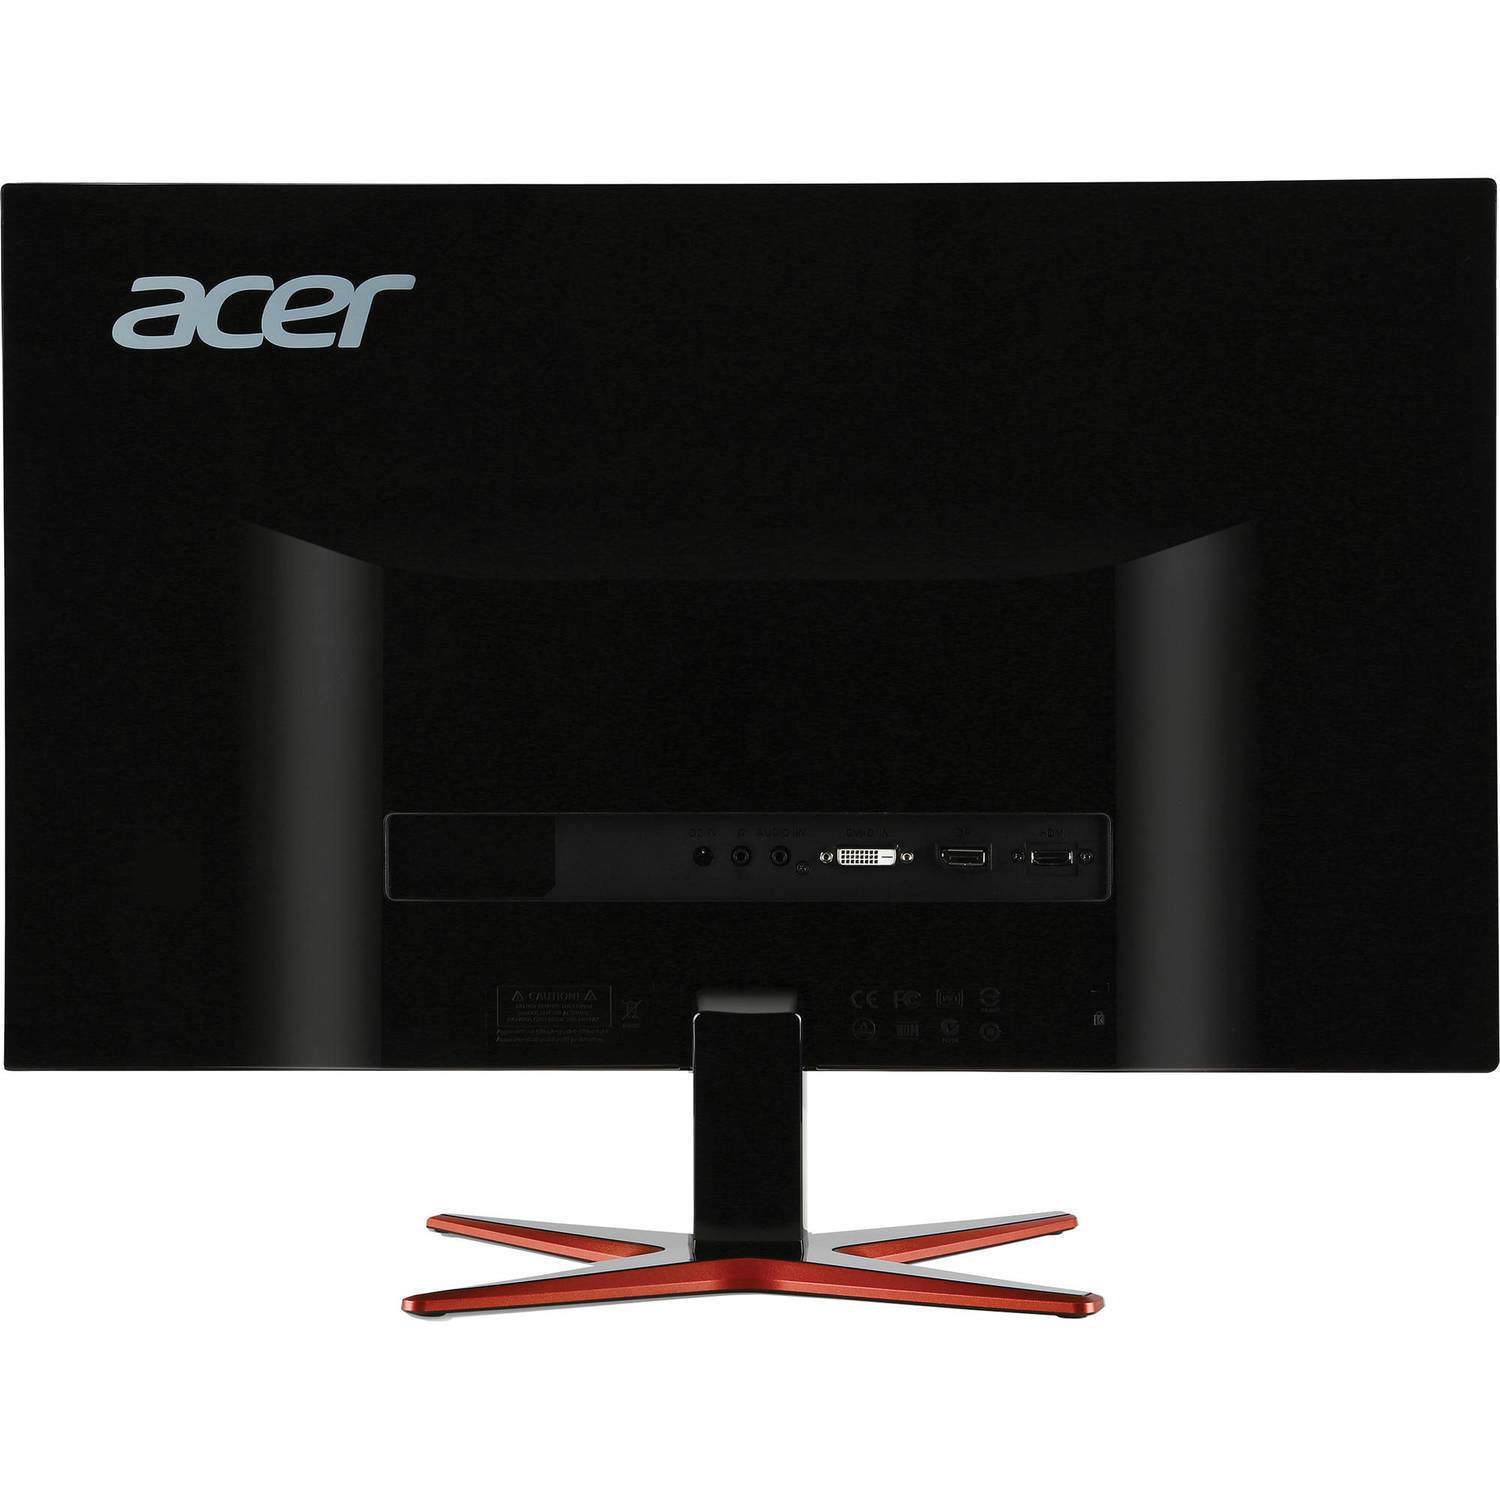 Acer XG270HU omidpx 27" Widescreen LED Backlit LCD Monitor